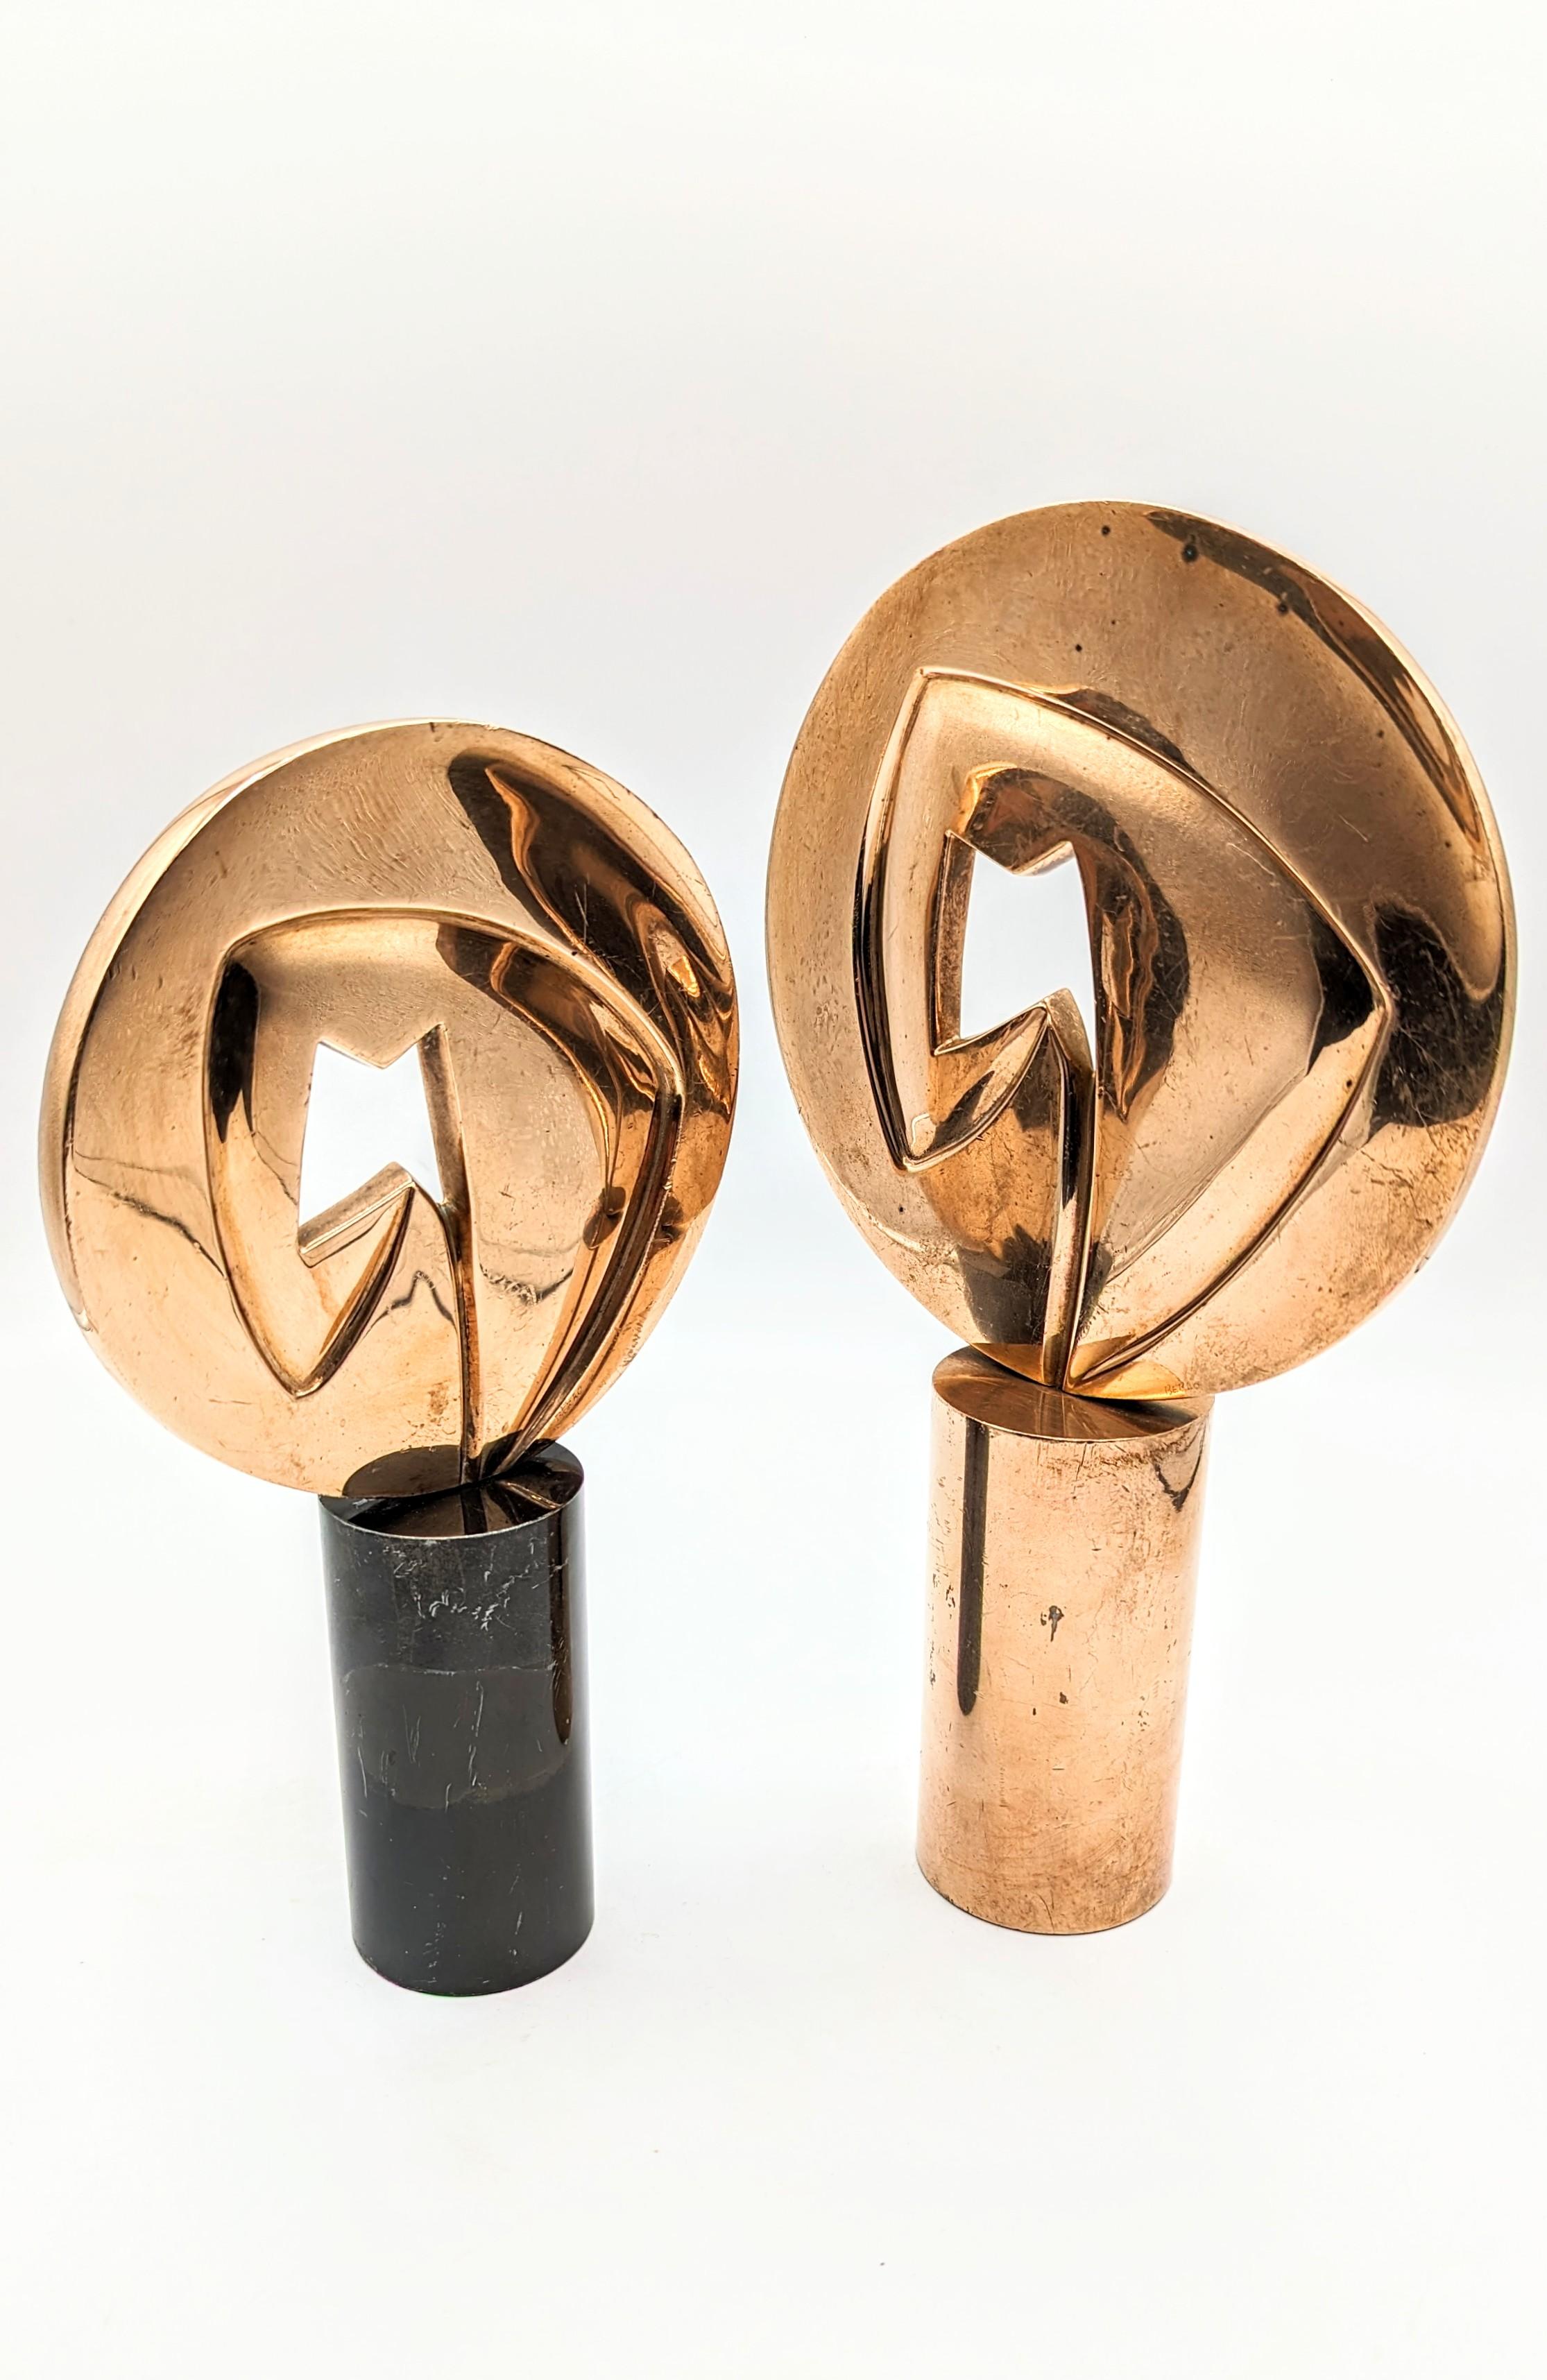 Rare and beautiful pair of brutalist bronze by Joaquim Berao manufactured in Spain in 1990s.
Very decorative object, brutalist design.
Joaquim Berao is a great sculptor in Spain, and also known for a great designer of fine jewelry.
Dimension: (cm)